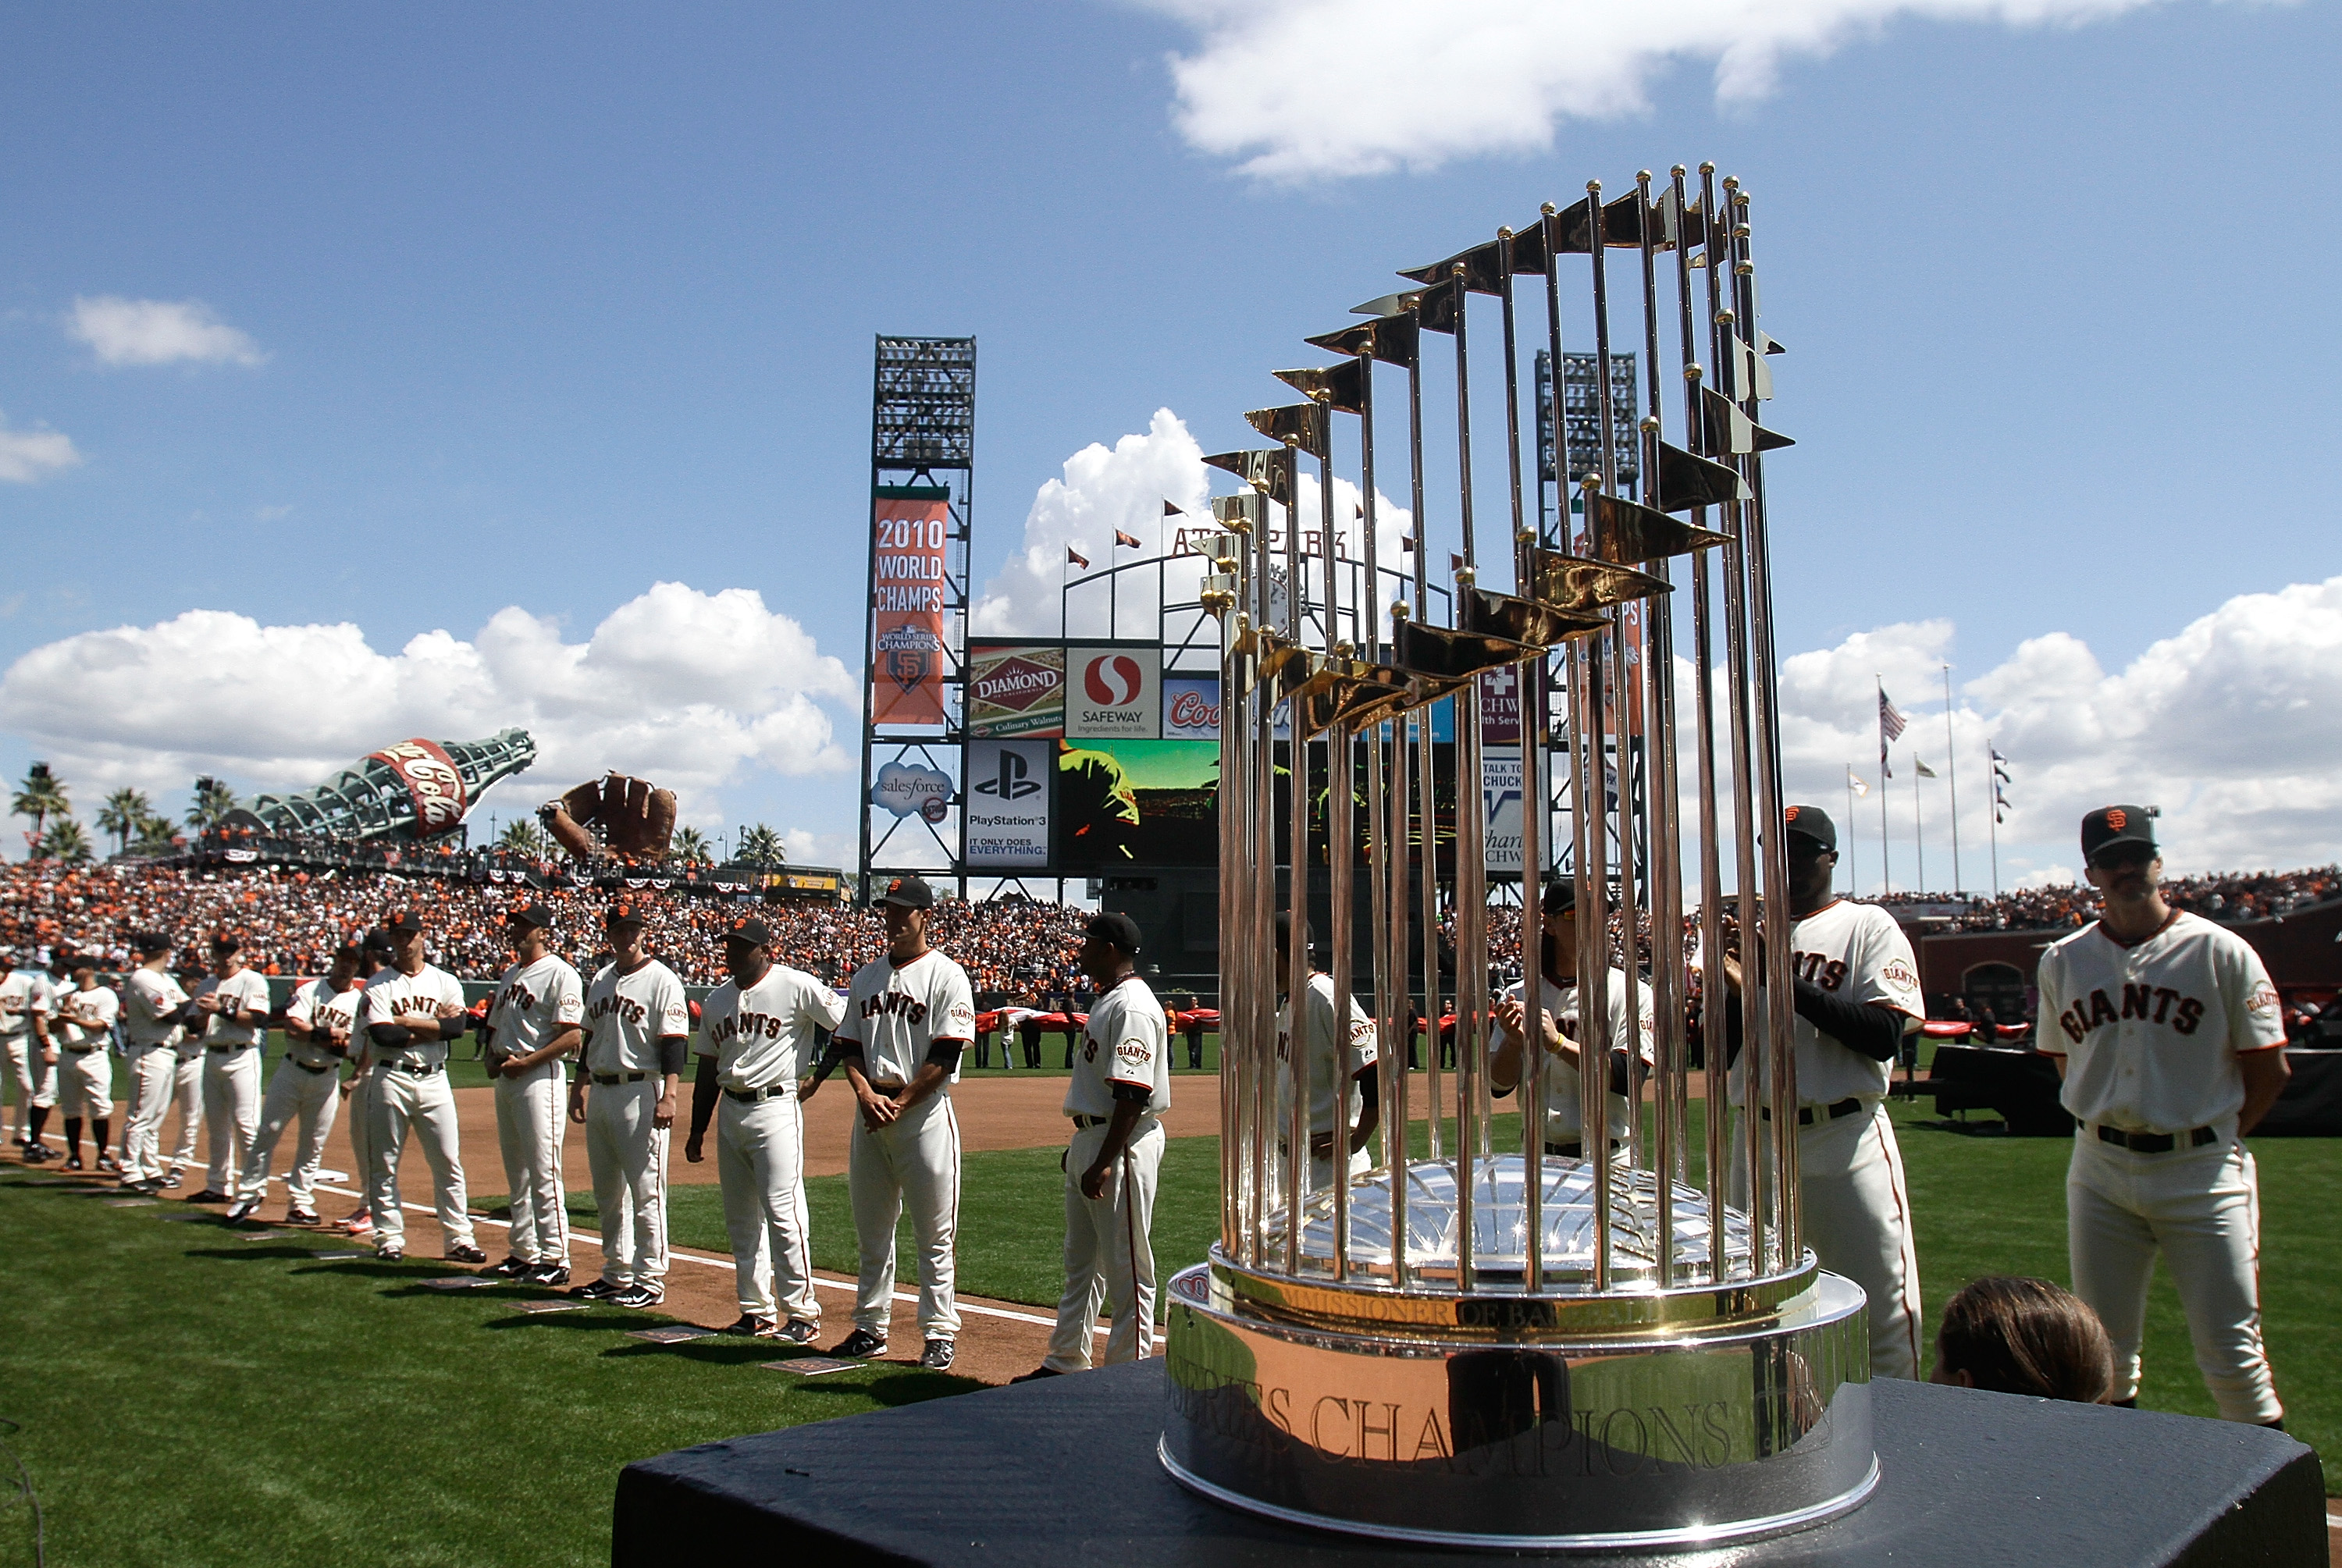 SAN FRANCISCO, CA - APRIL 08:  The 2010 World Series trophy is displayed as San Francisco Giants players line up before the start of the Giants' opening day game against the St. Louis Cardinals at AT&T Park on April 8, 2011 in San Francisco, California.